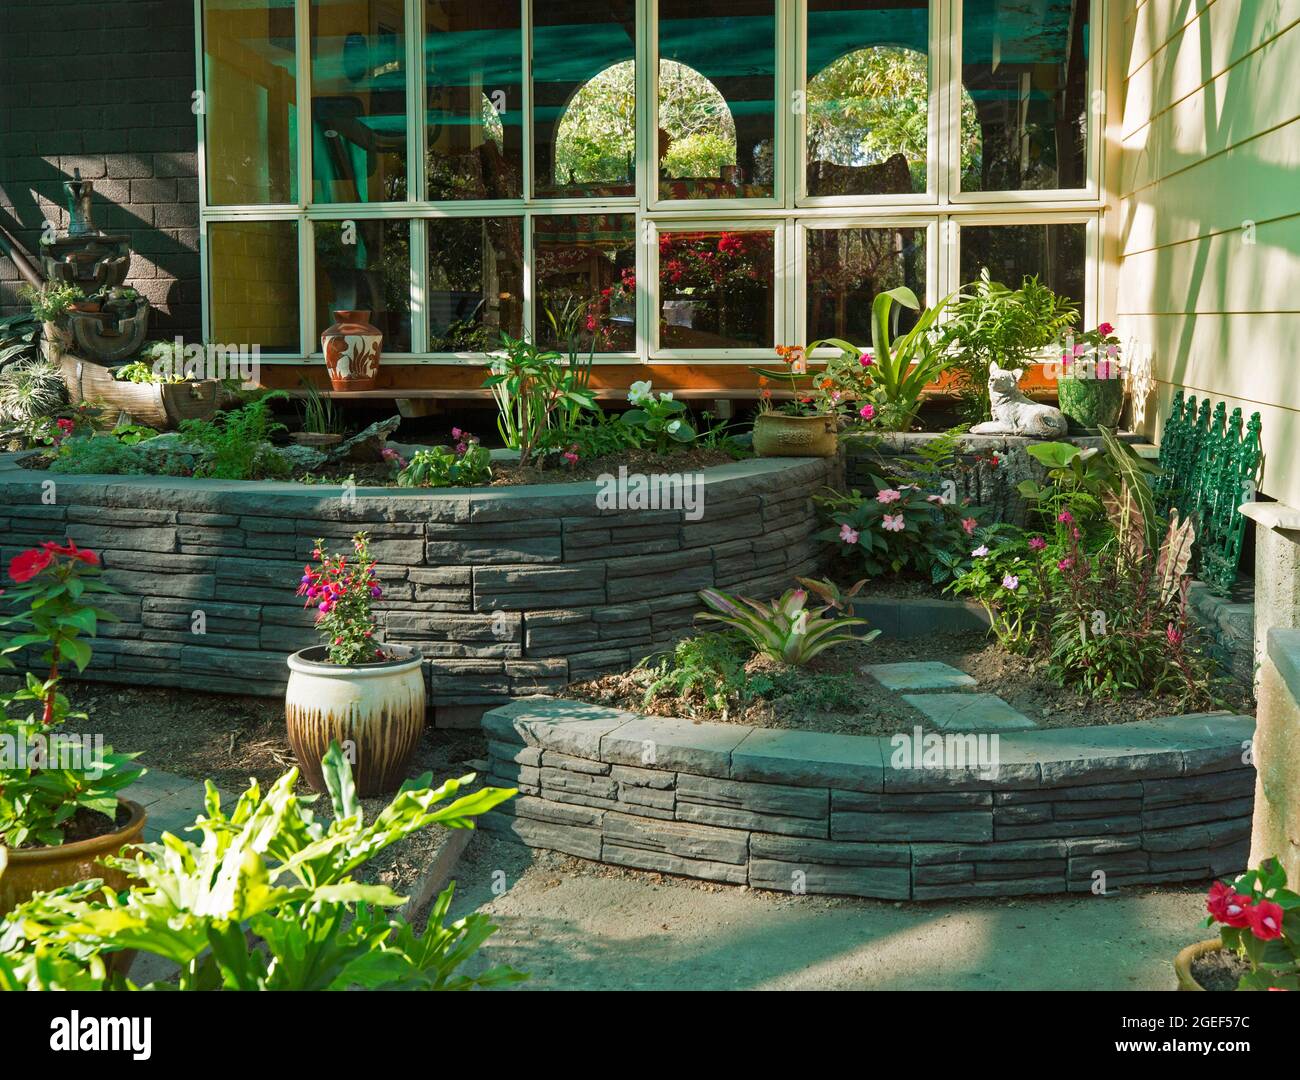 Garden feature with decorative curved brick retaining walls surrounding raised garden beds in a fernery, in Australia Stock Photo